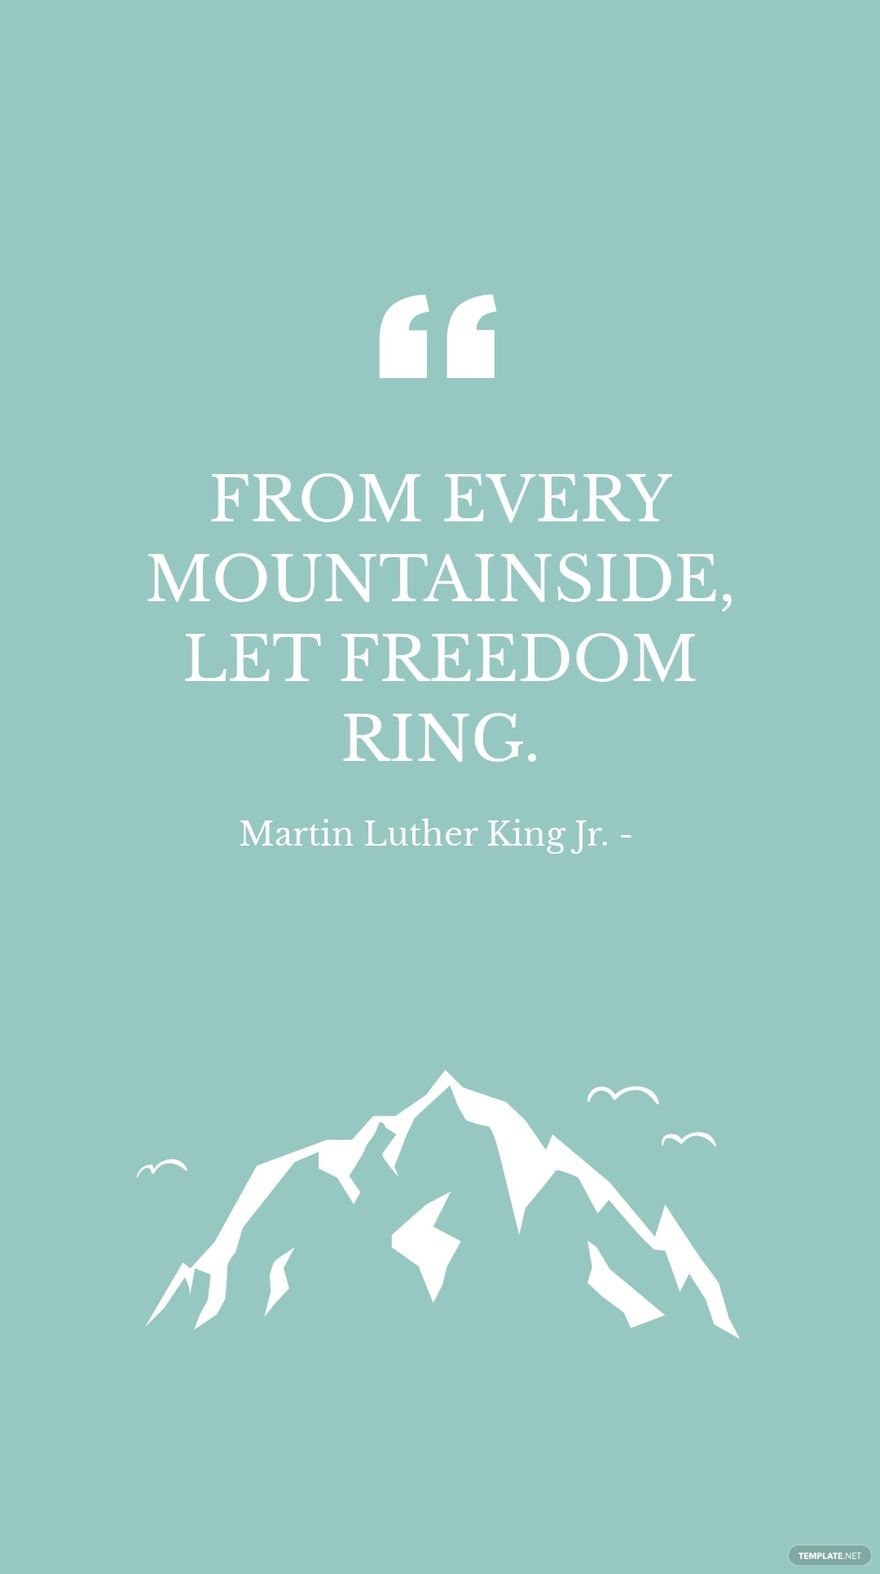 Free Martin Luther King Jr. - From every mountainside, let freedom ring. in JPG